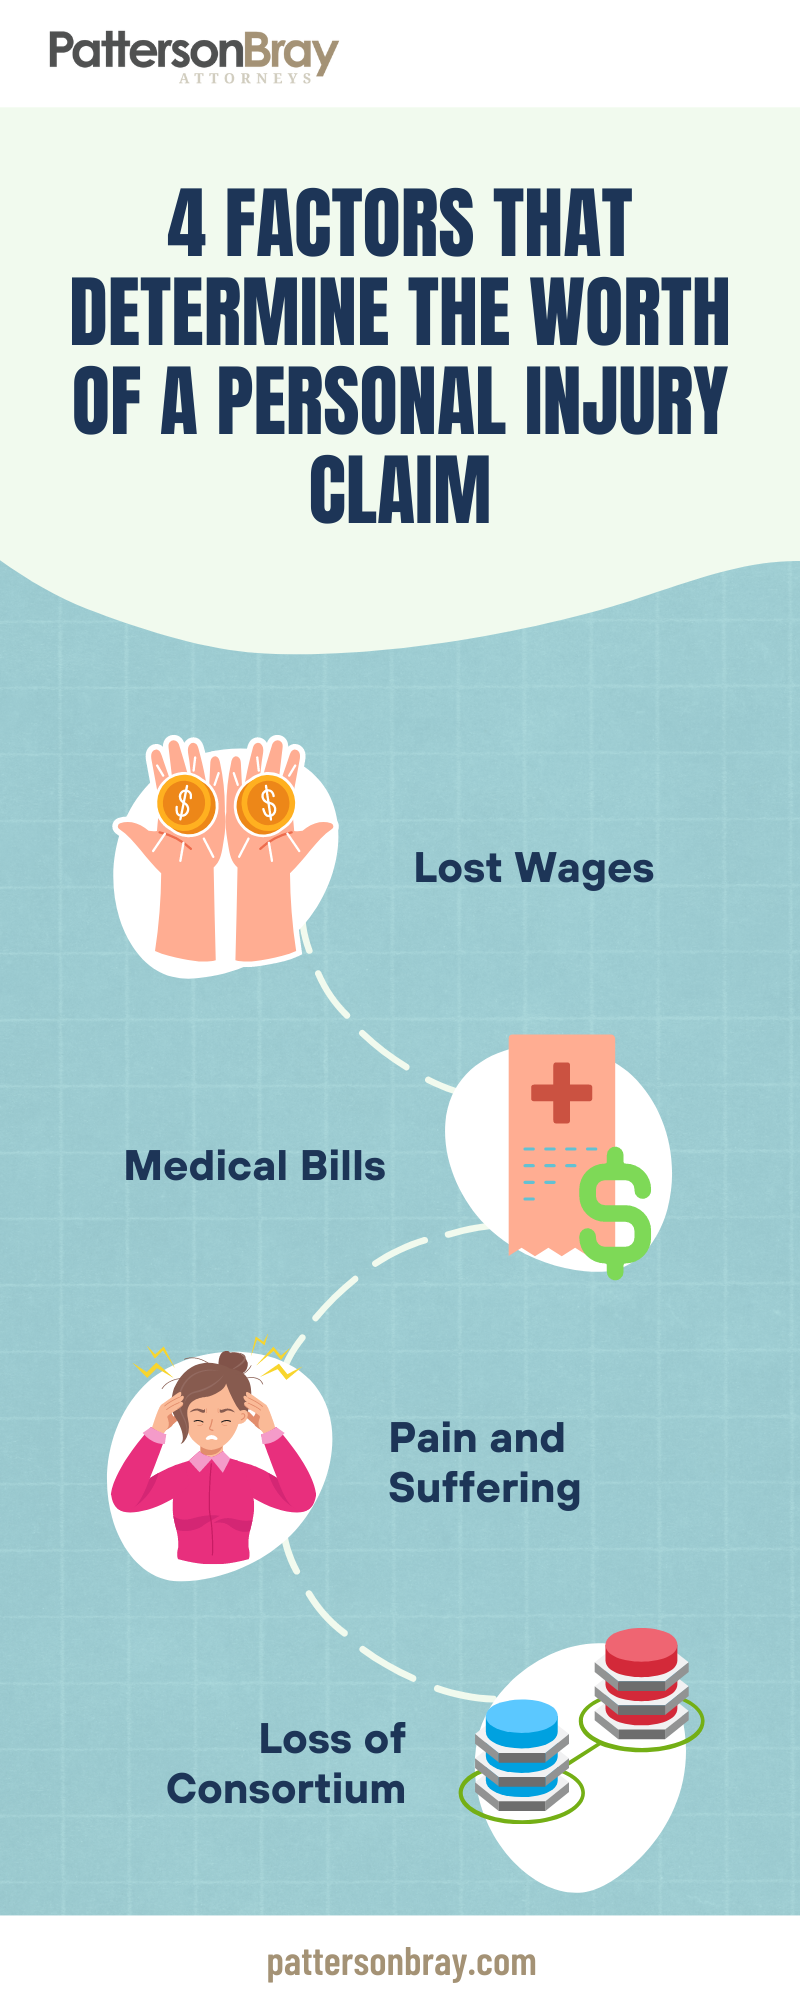 4 Factors That Determine The Worth of A Personal Injury Claim Infographic